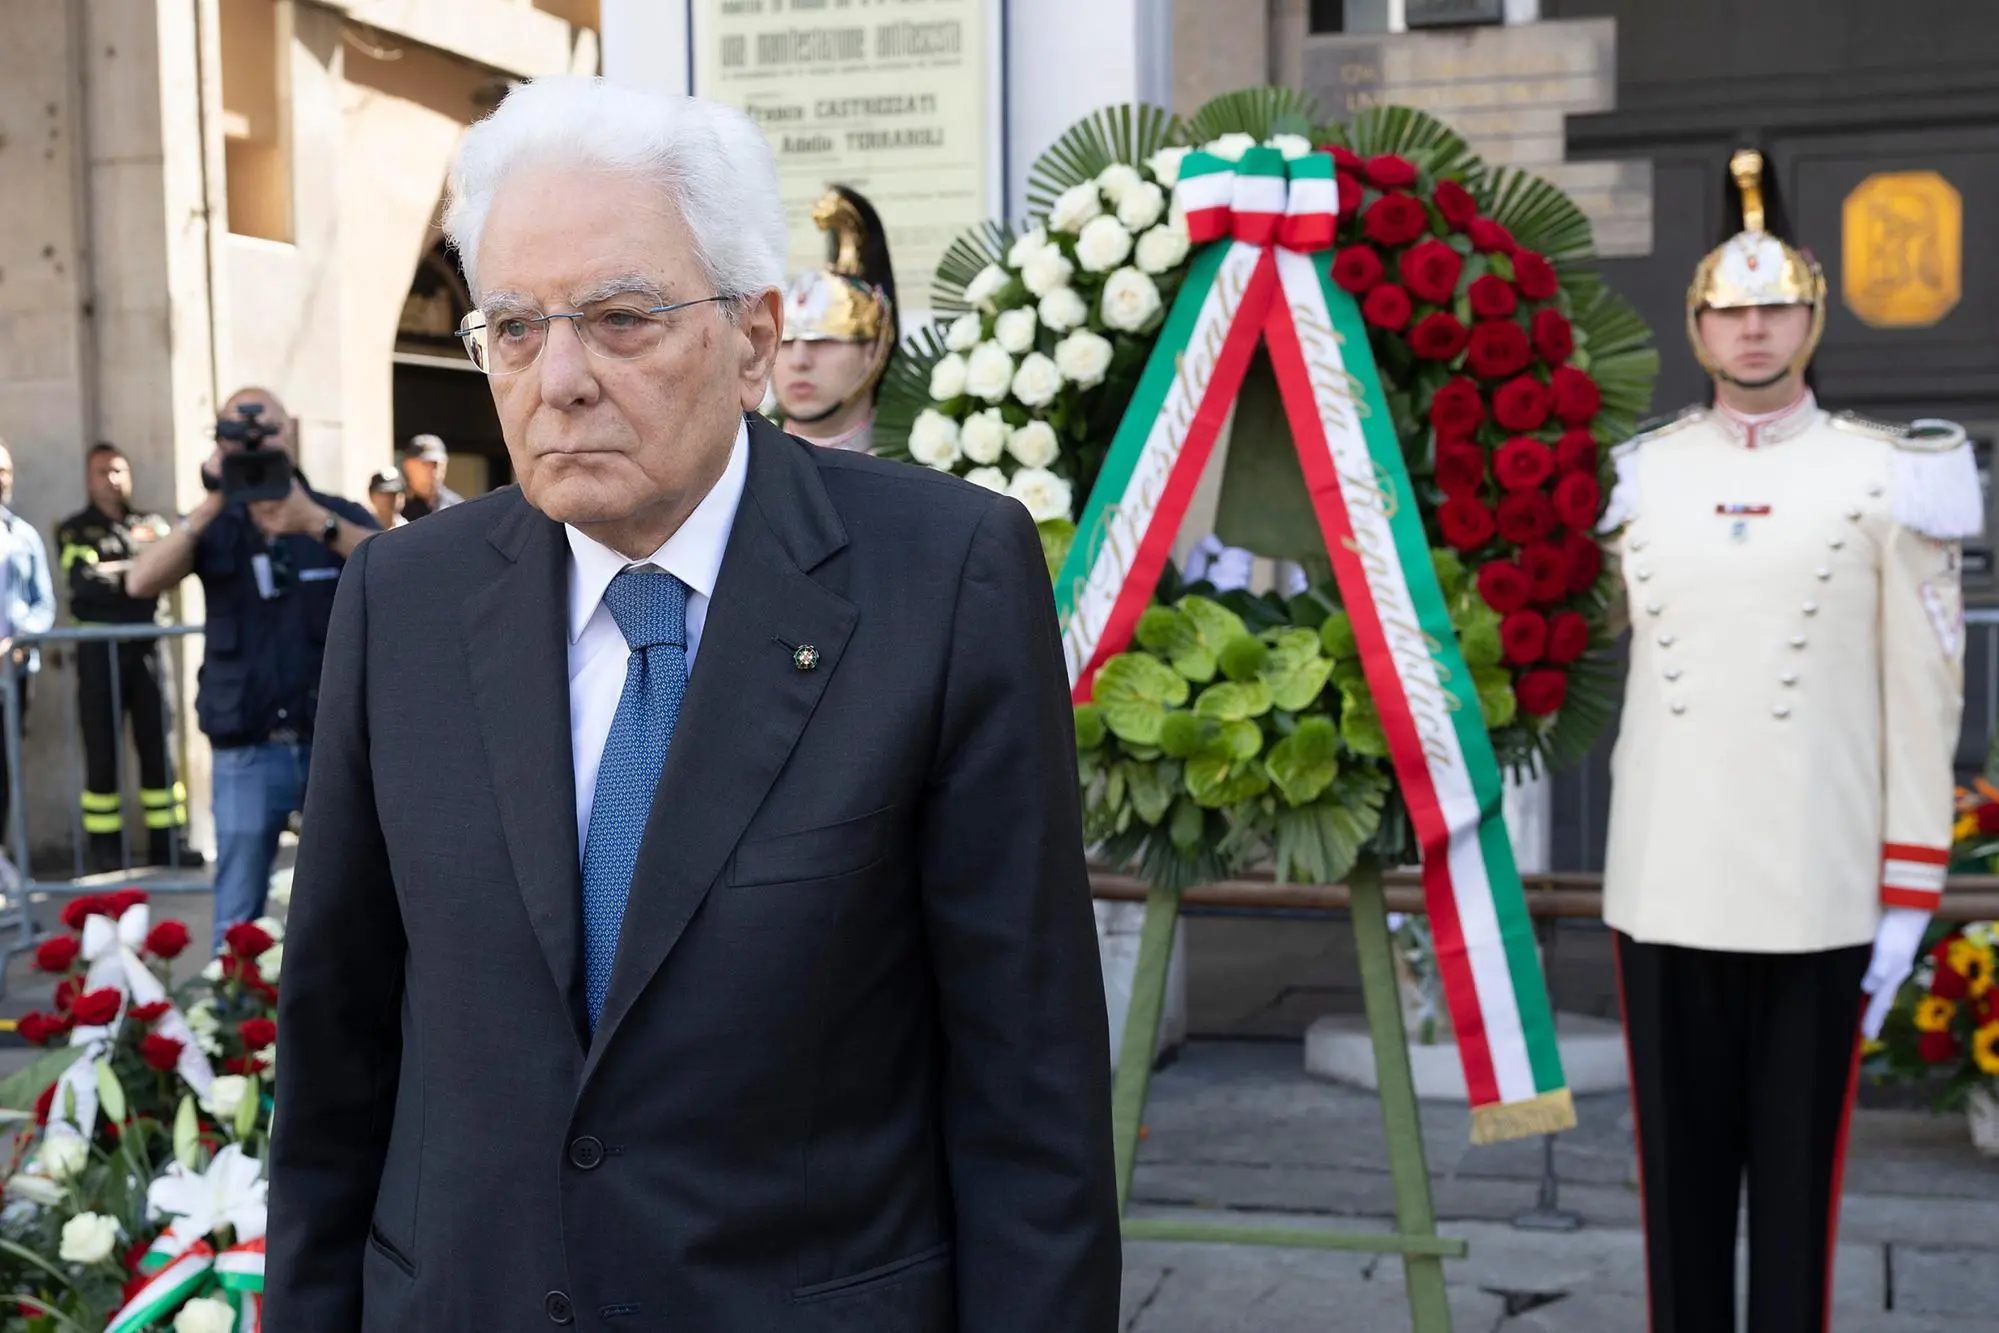 Mattarella places a wreath of flowers on the stele of the fallen (Ansa)